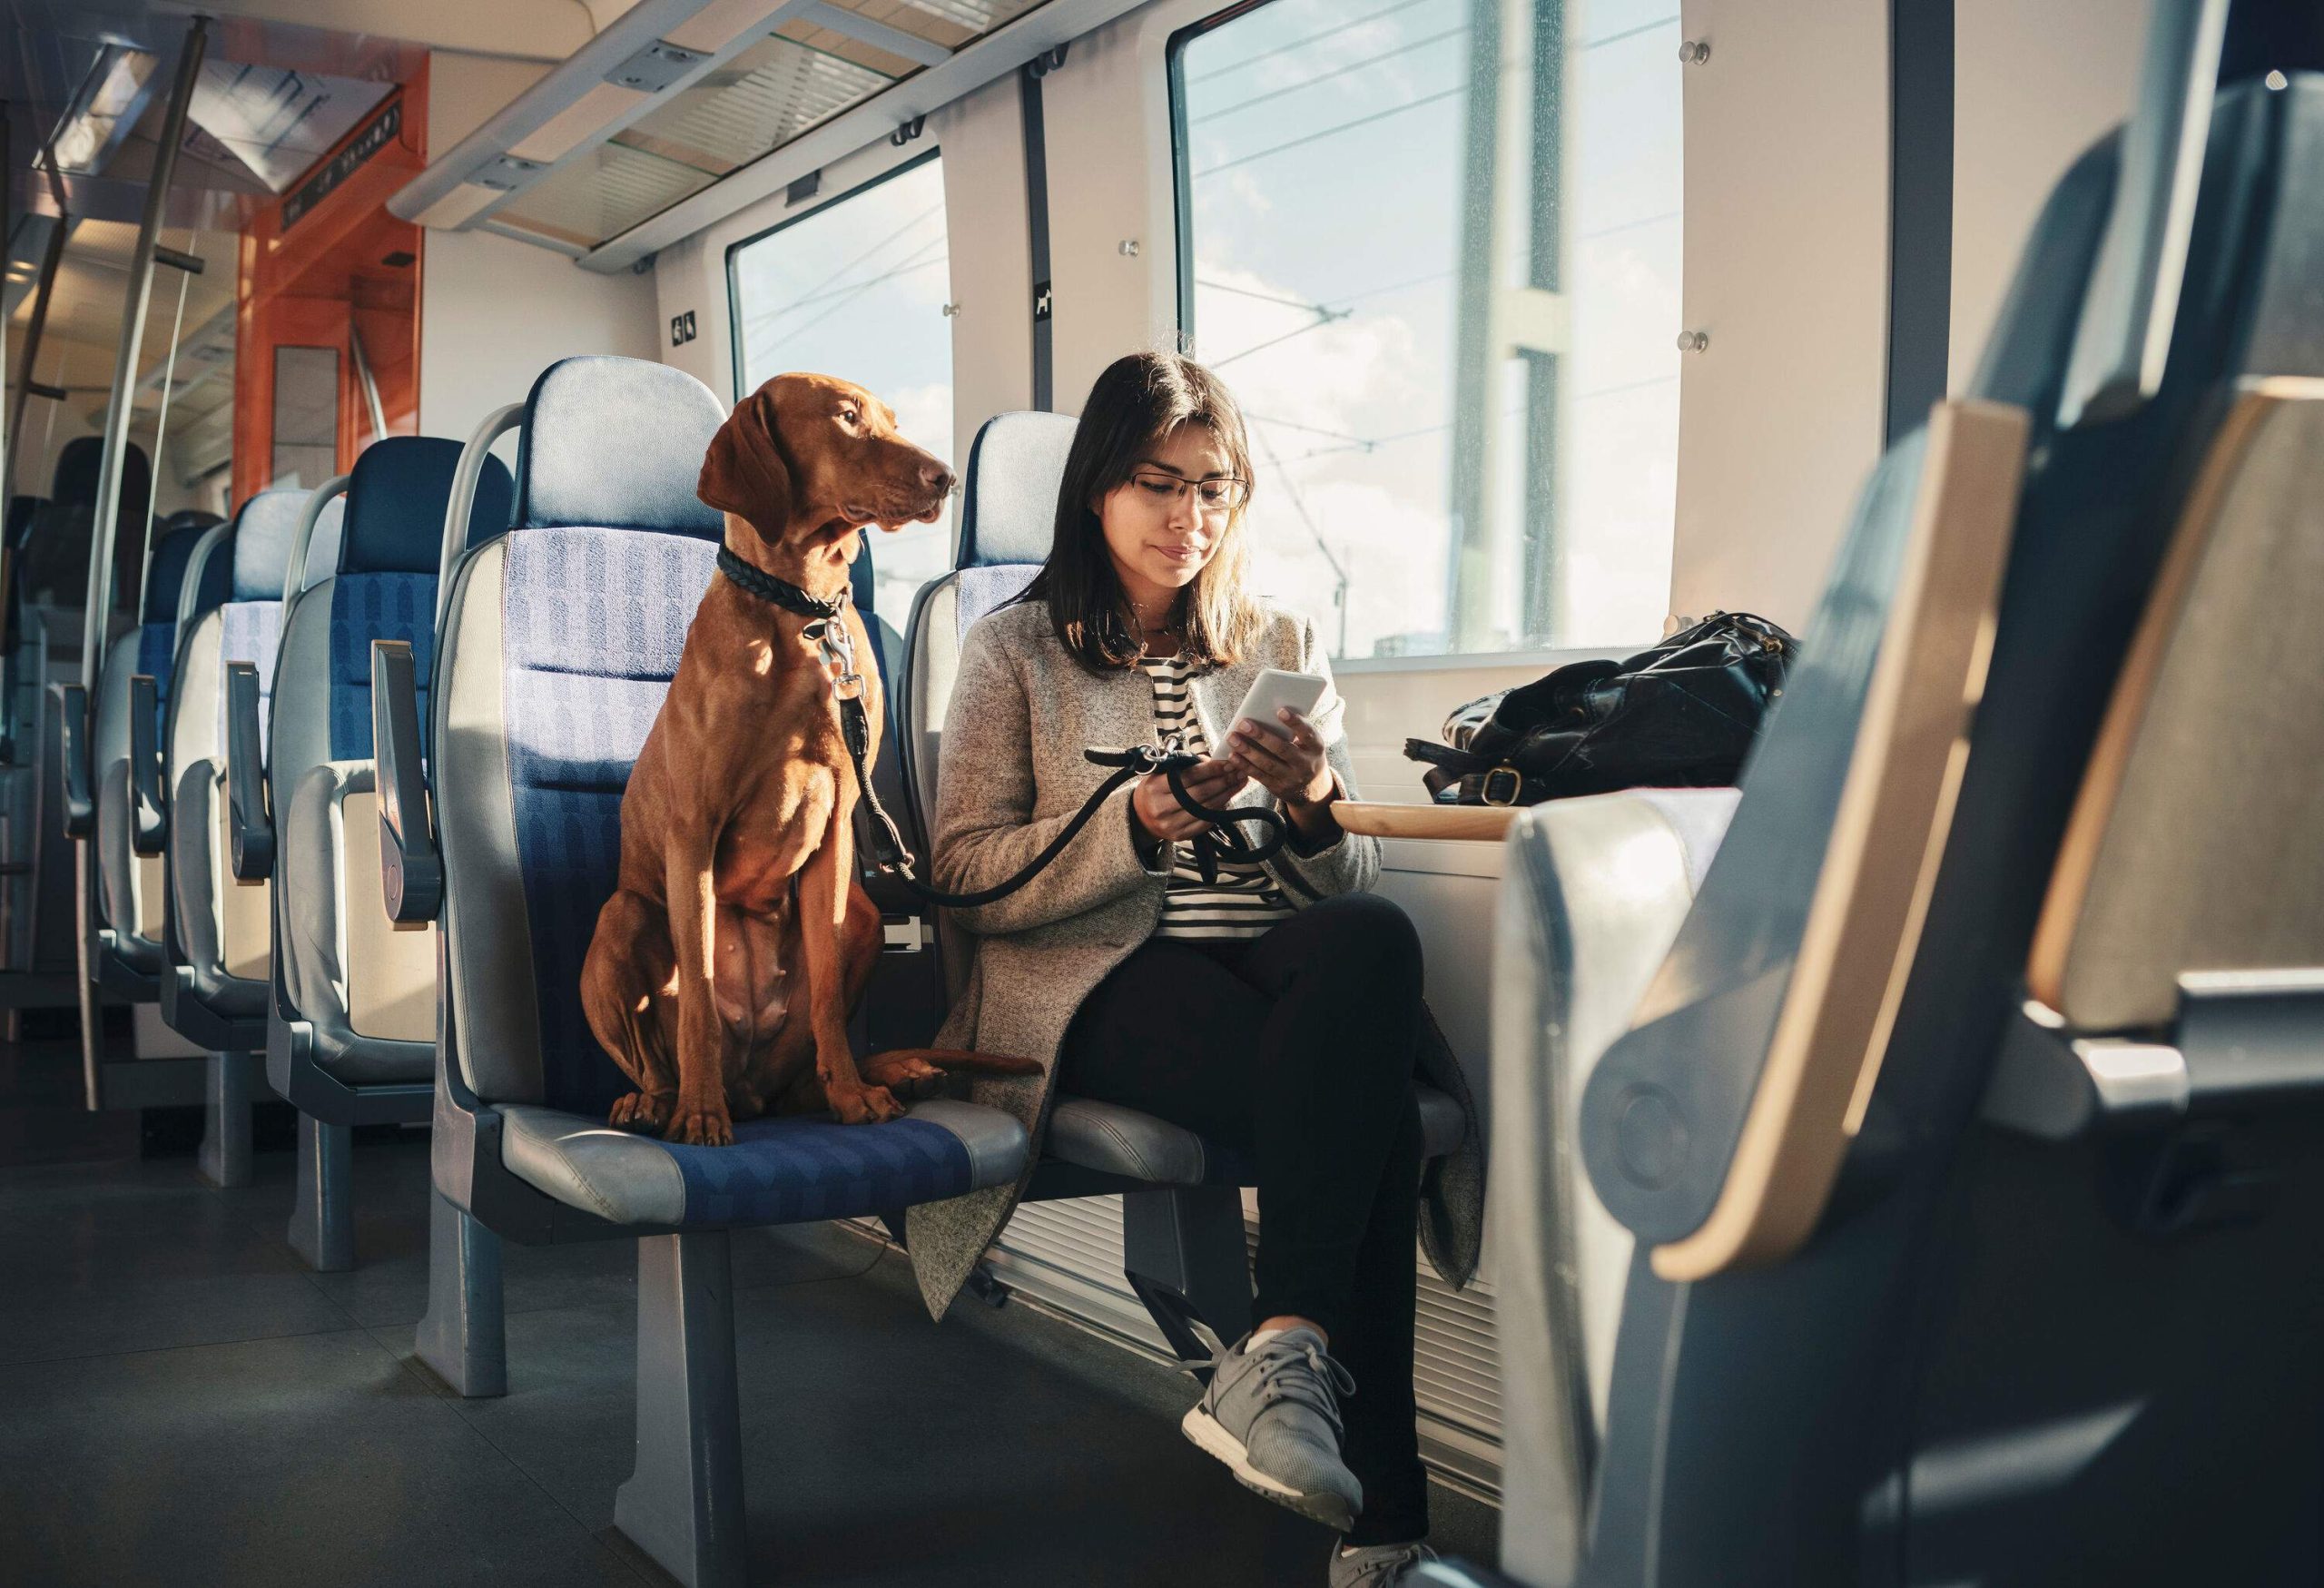 A girl uses her phone while sitting beside a brown dog in a train.